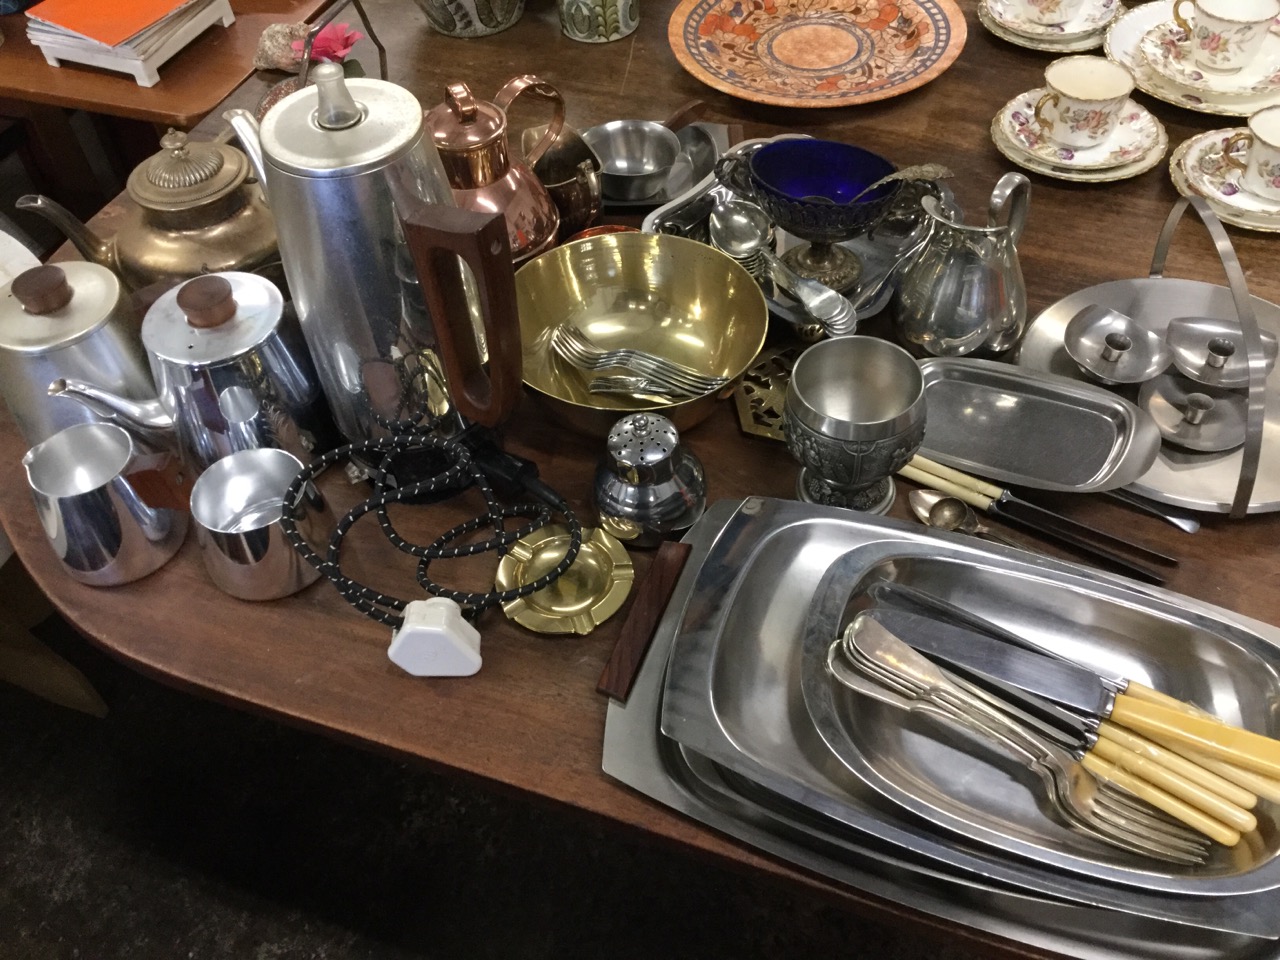 Miscellaneous silver plate, pewter, brass, stainless, copper, etc., including a ribbed three-piece